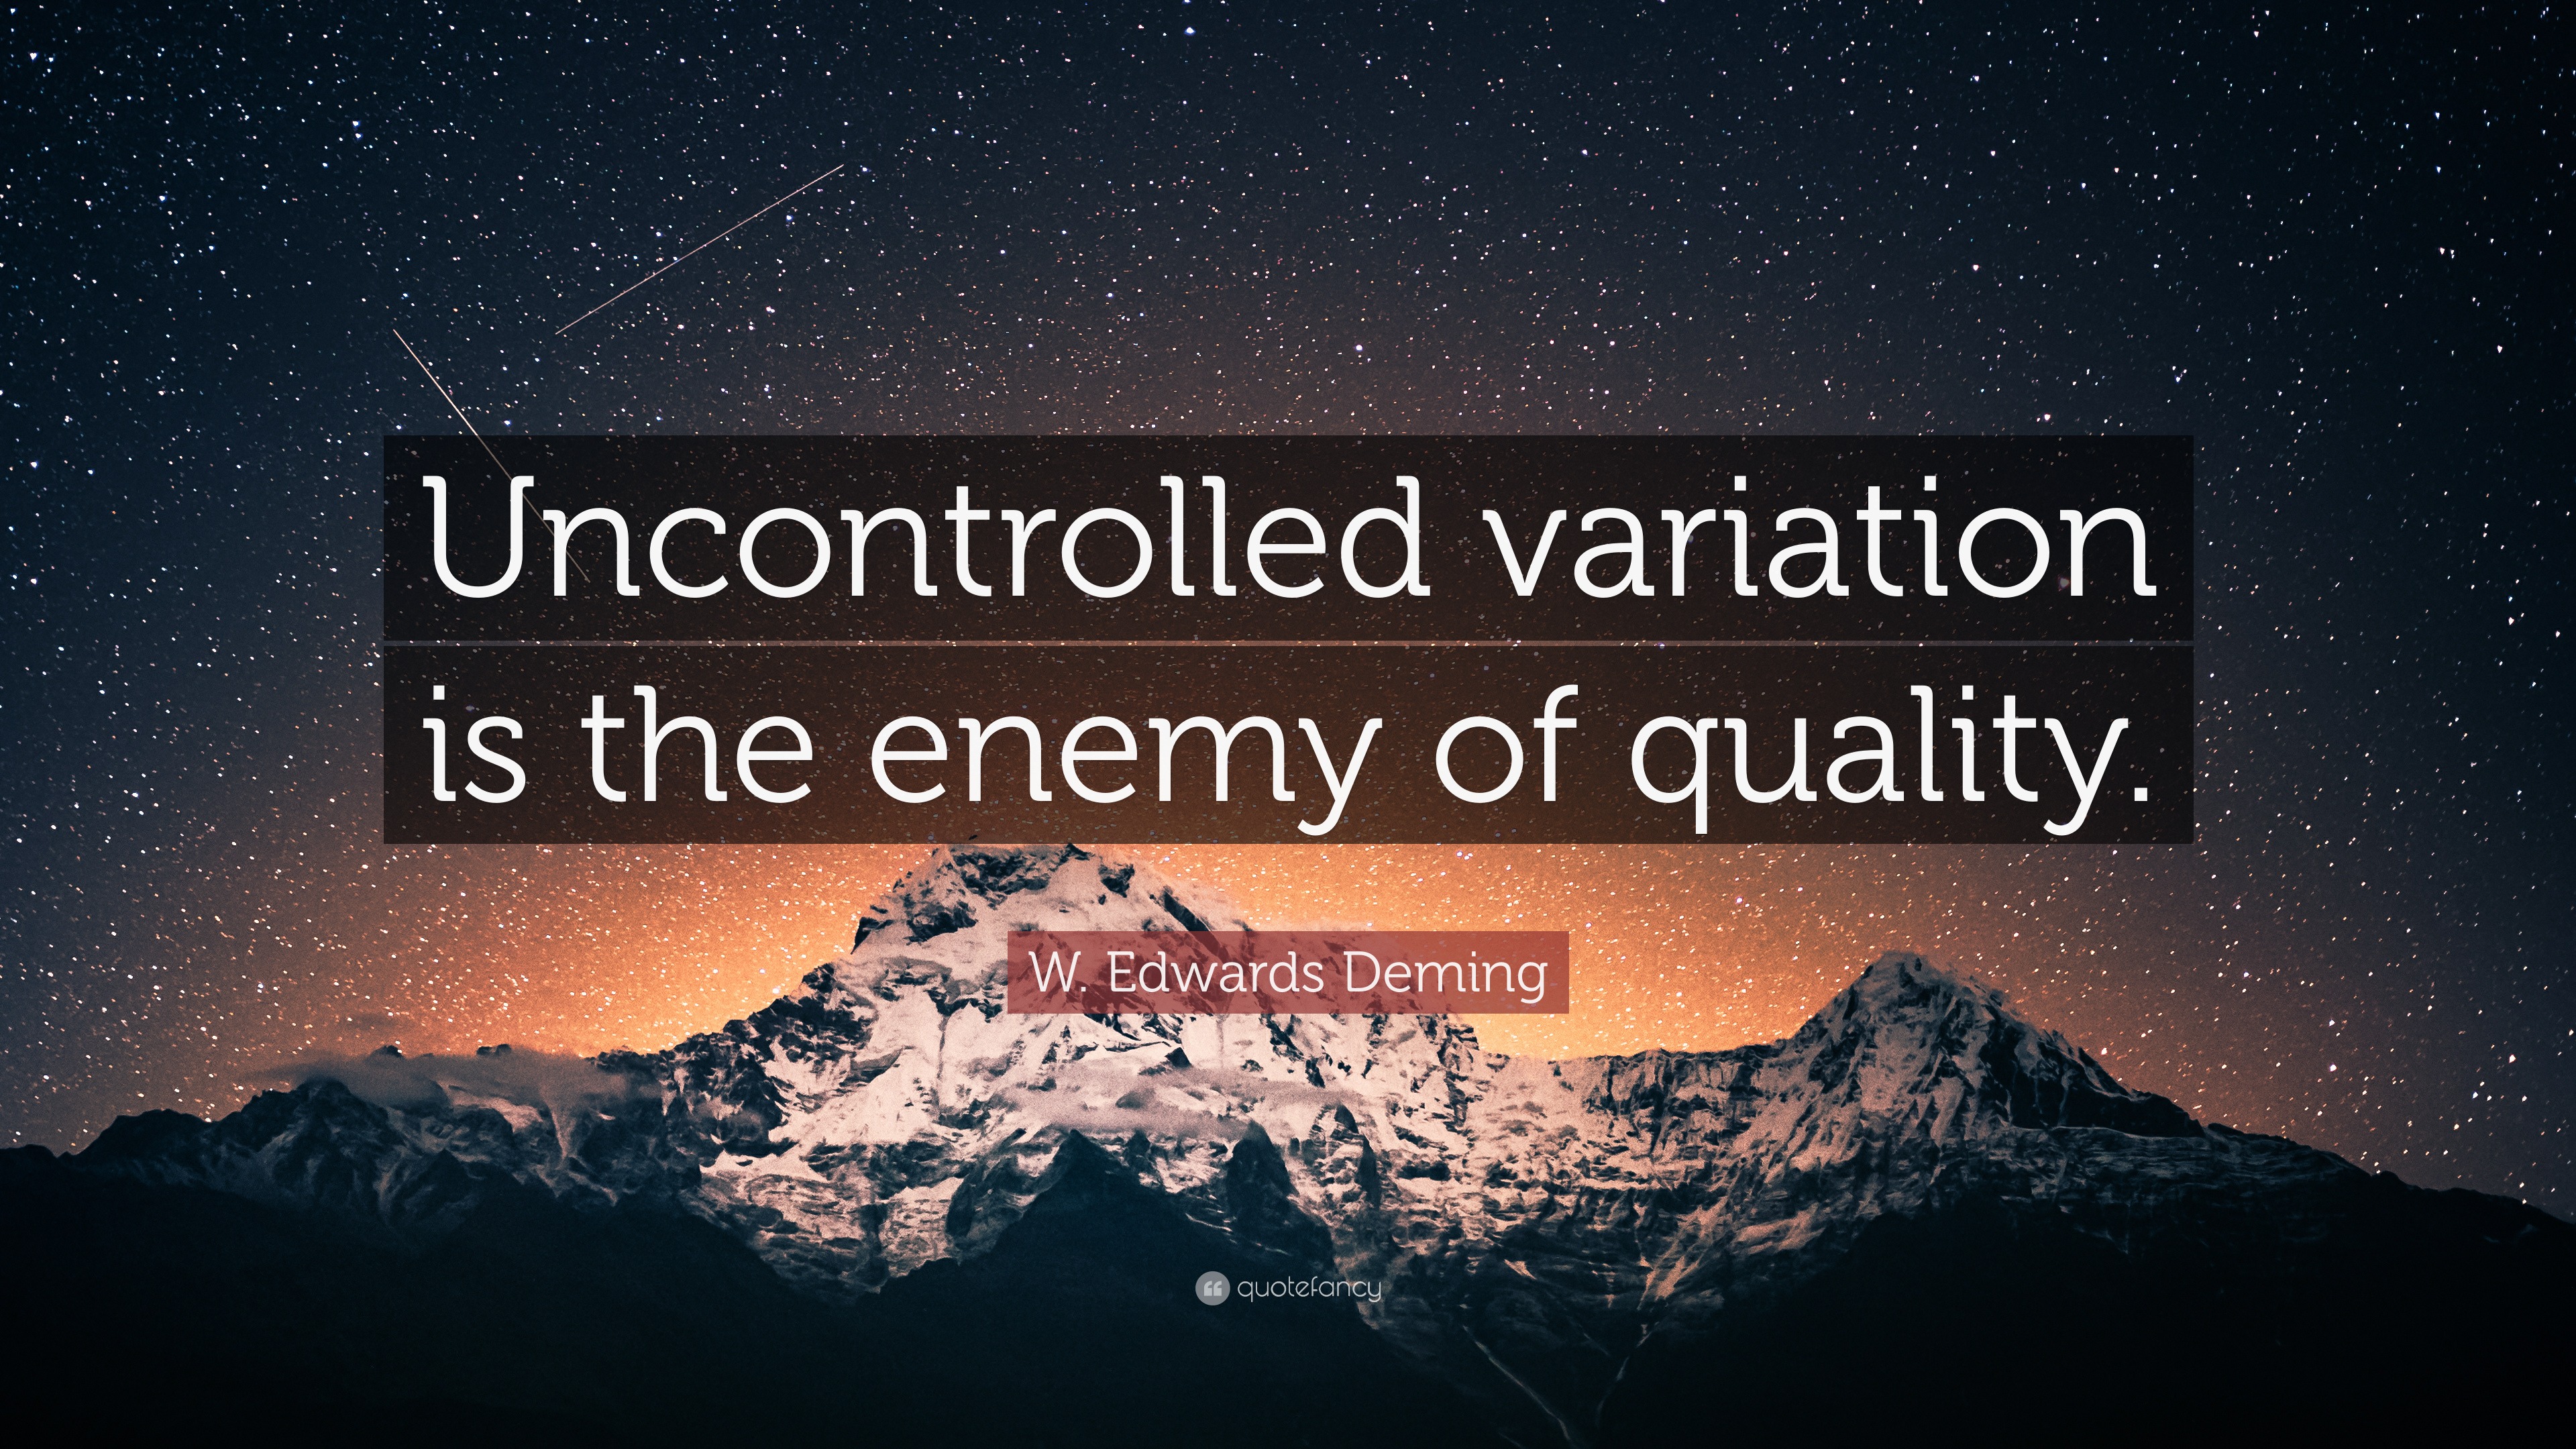 W. Edwards Deming Quote: “Uncontrolled variation is the enemy of quality.”